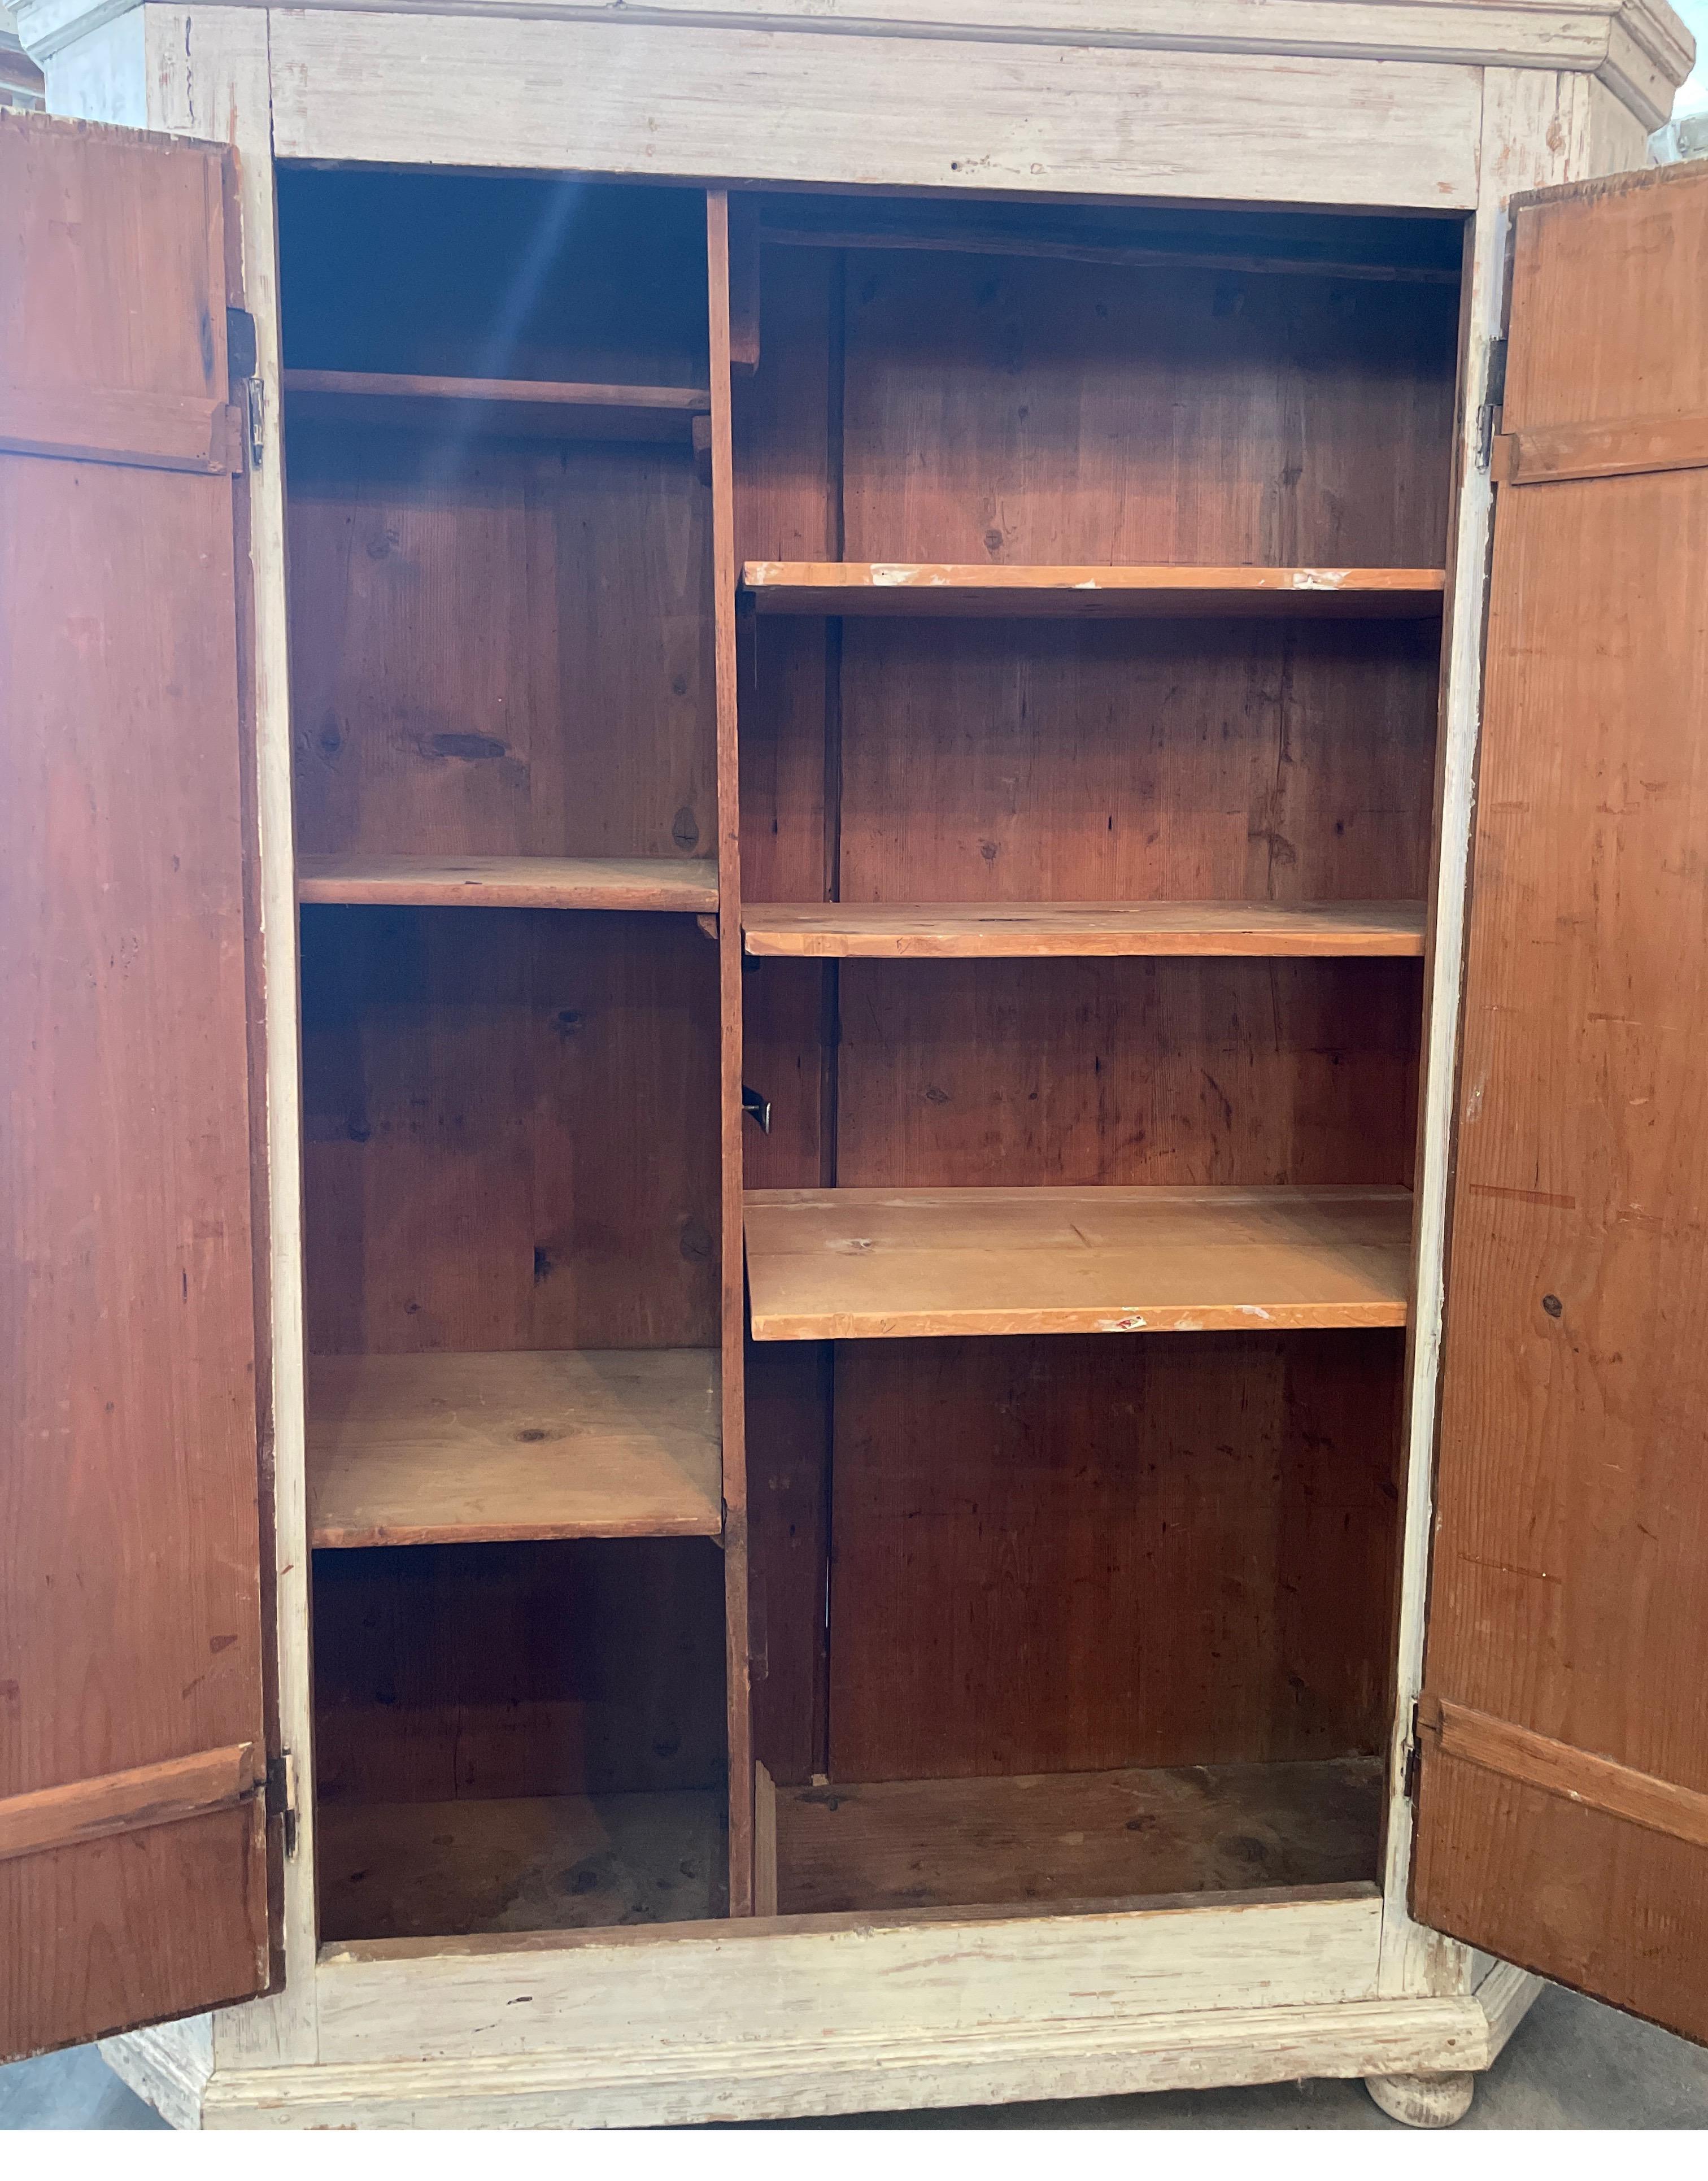 This is a smaller scale cabinet with lots of shelves and a bar to hang things. It’s from the Tuscan part of Italian and used for clothing storage. It’s key does lock the door.